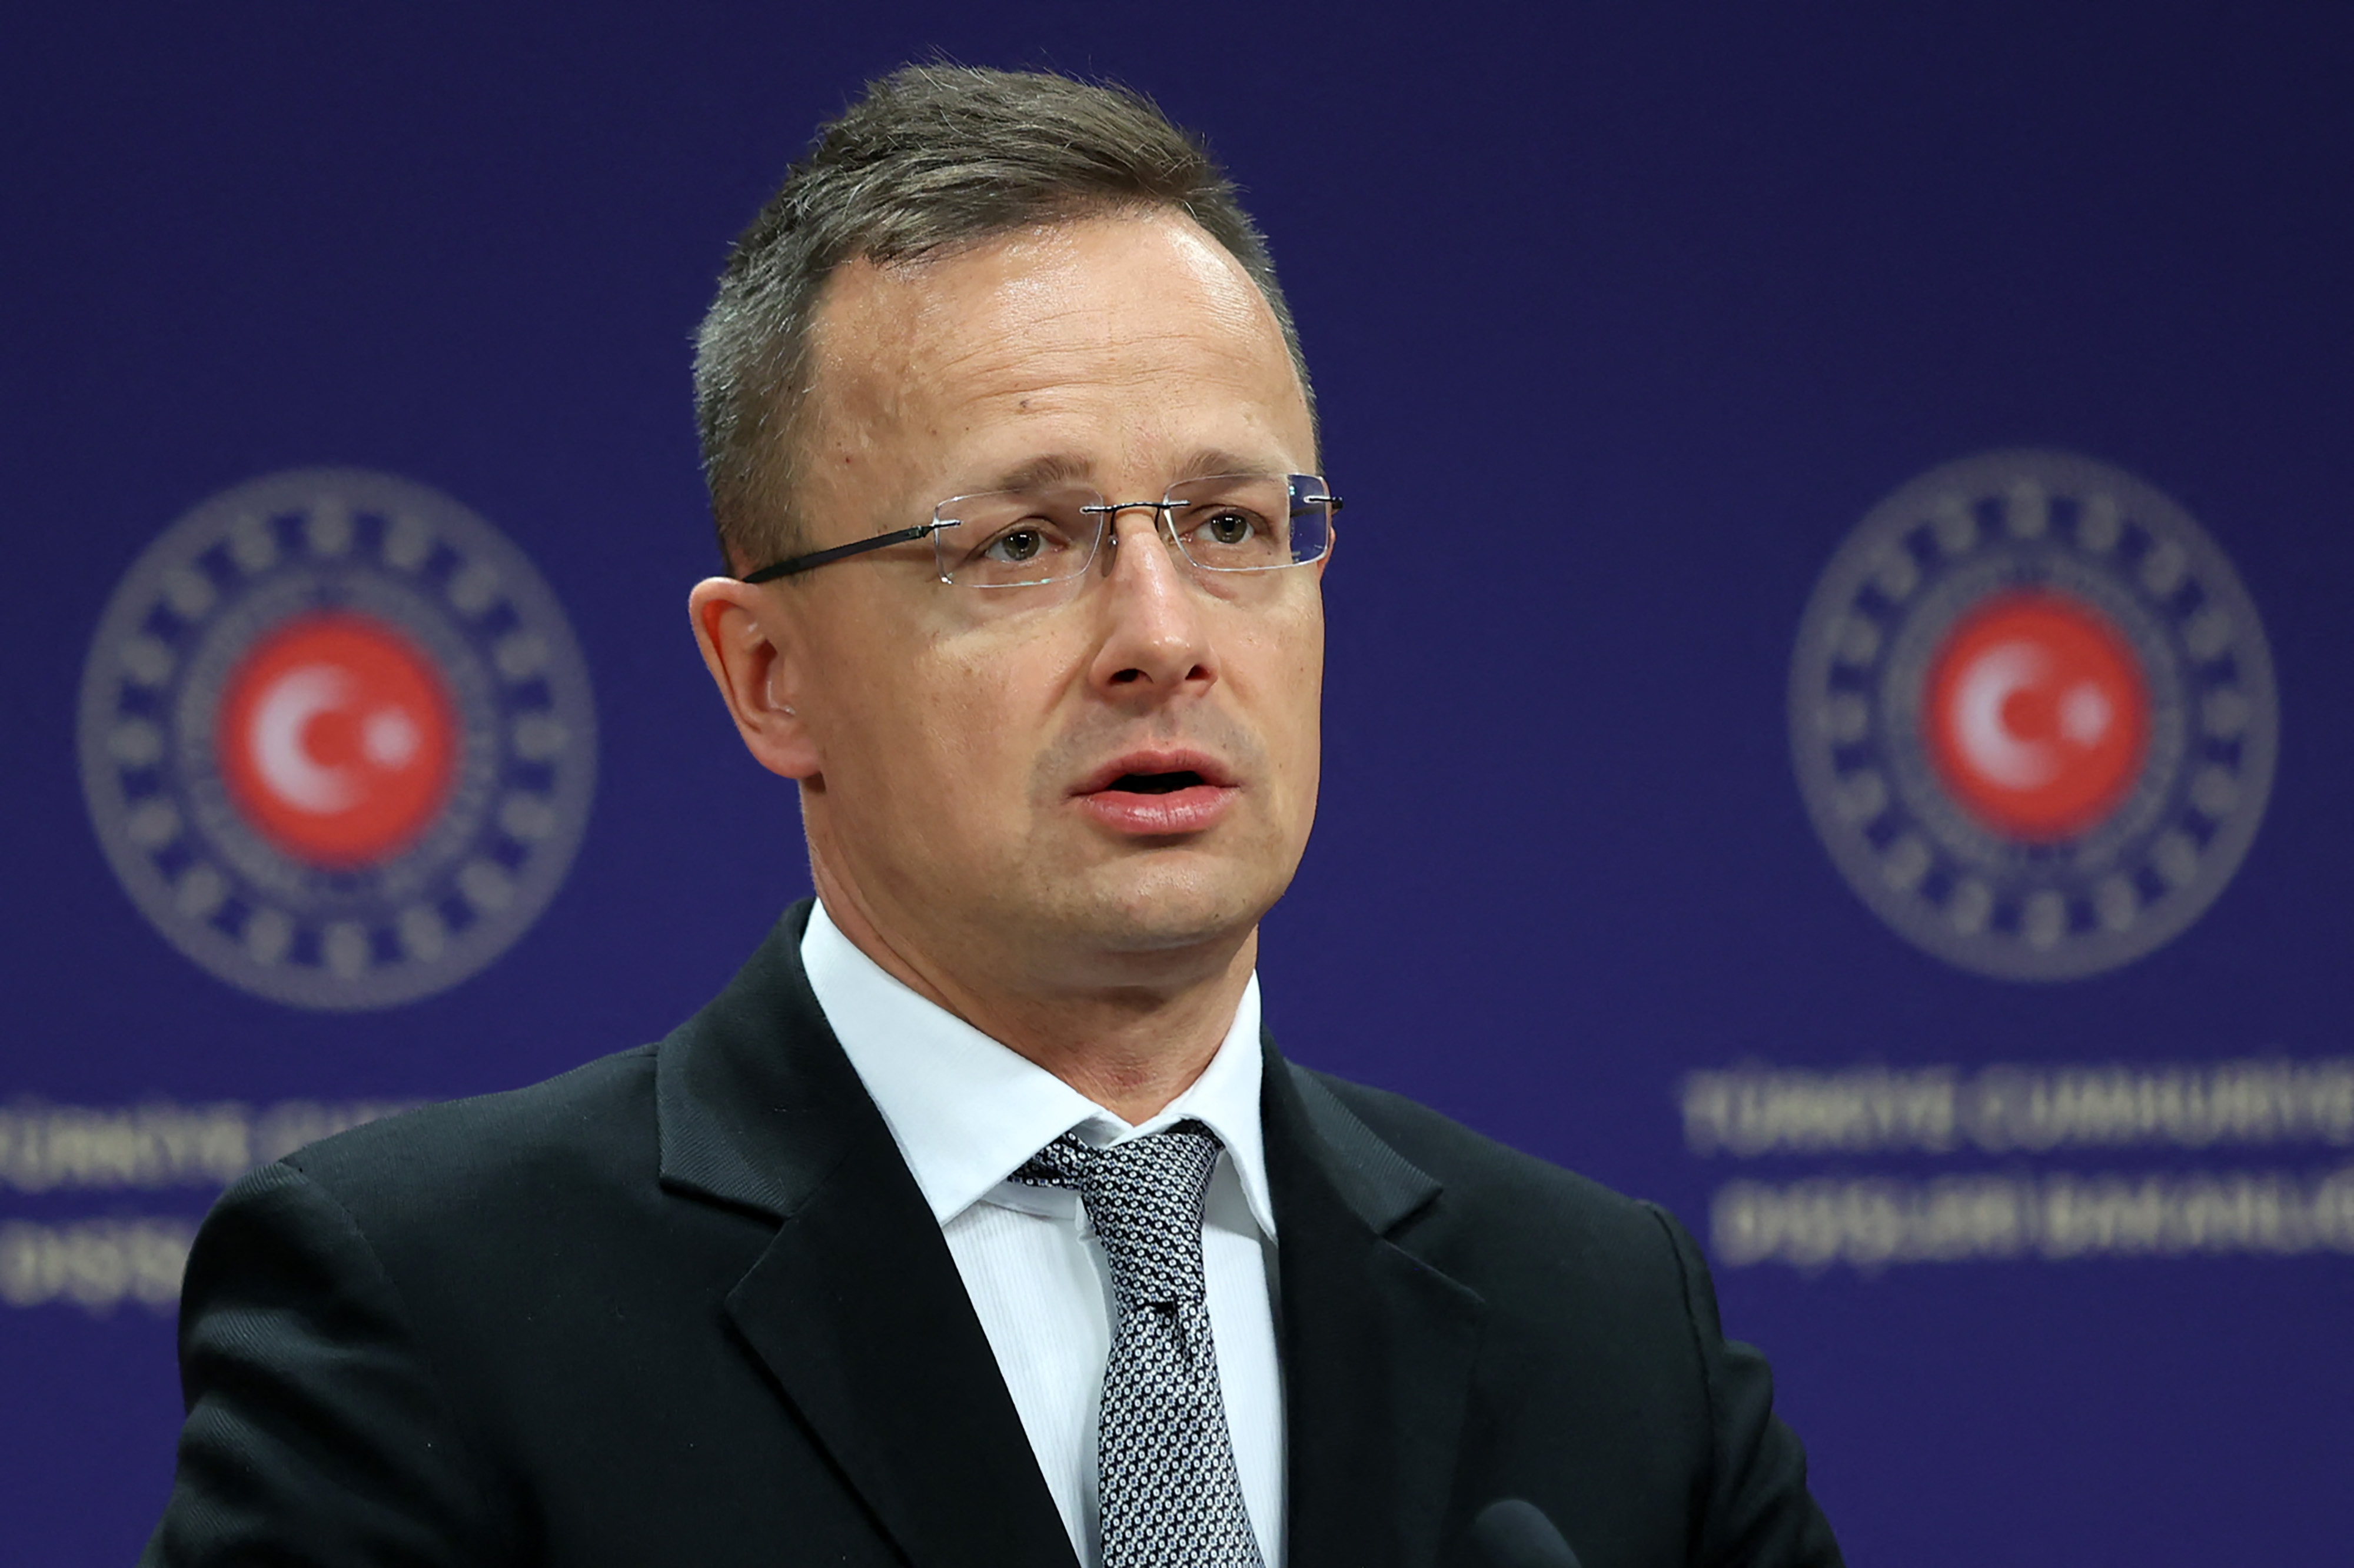 Hungarian Foreign Minister Péter Szijjártó holds a press conference after meeting his Turkish counterpart in Ankara, Turkey, on April 19.